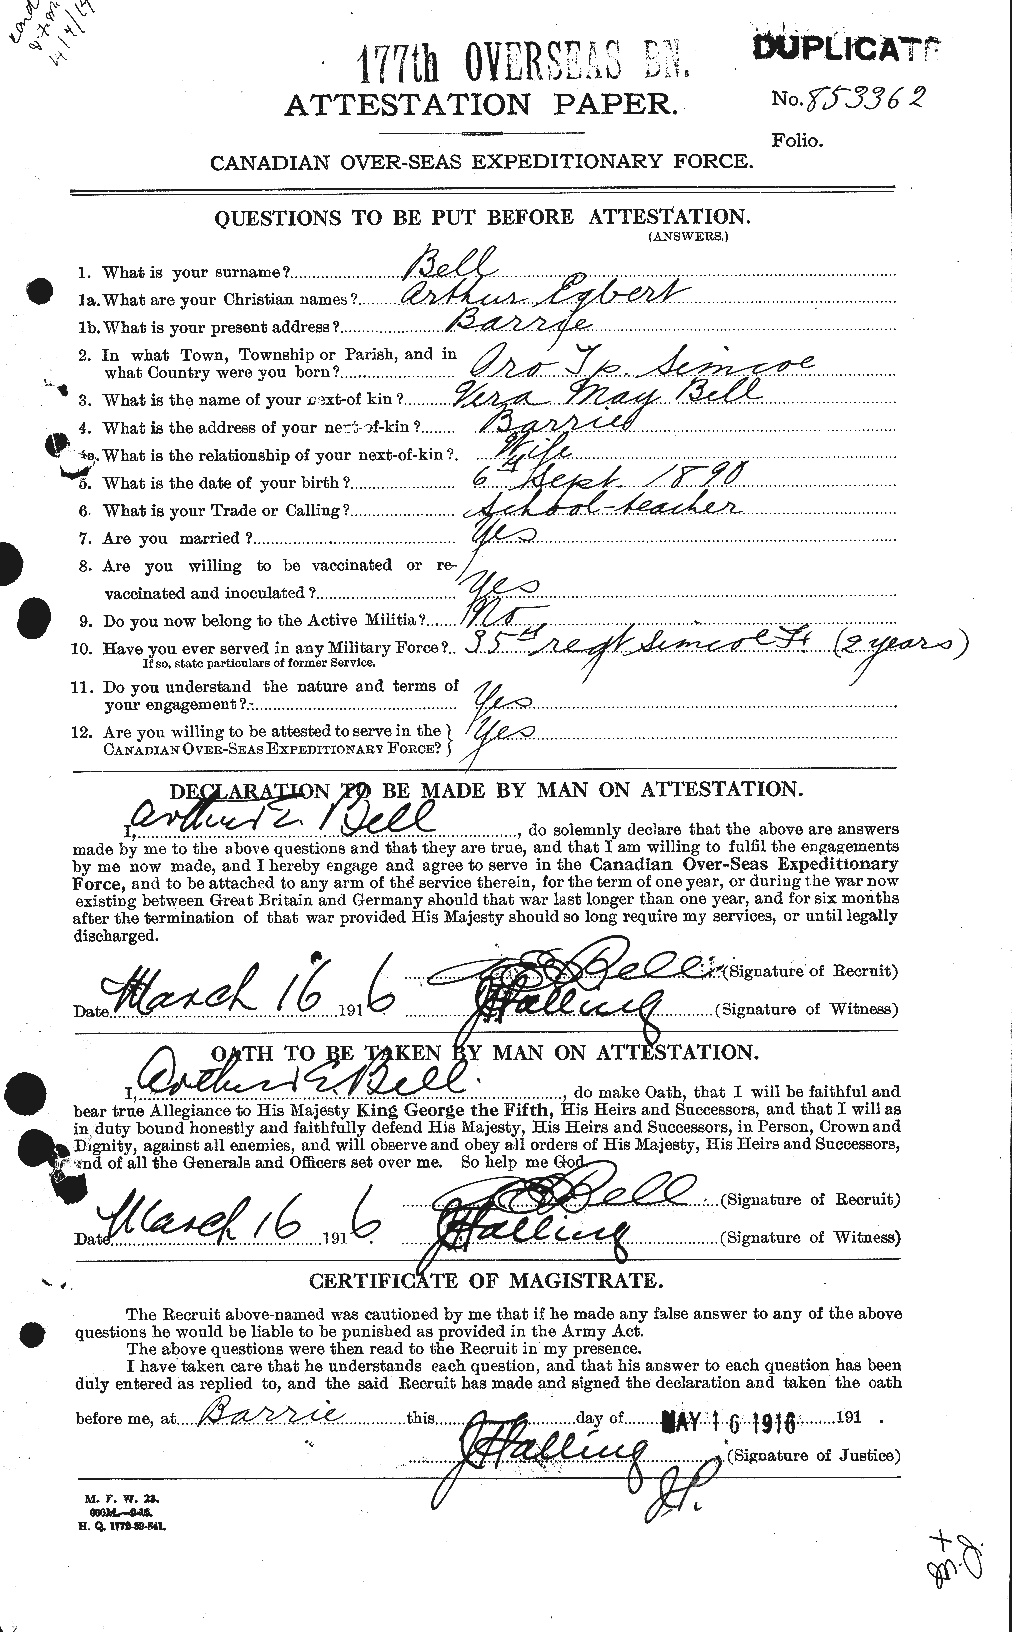 Personnel Records of the First World War - CEF 233888a